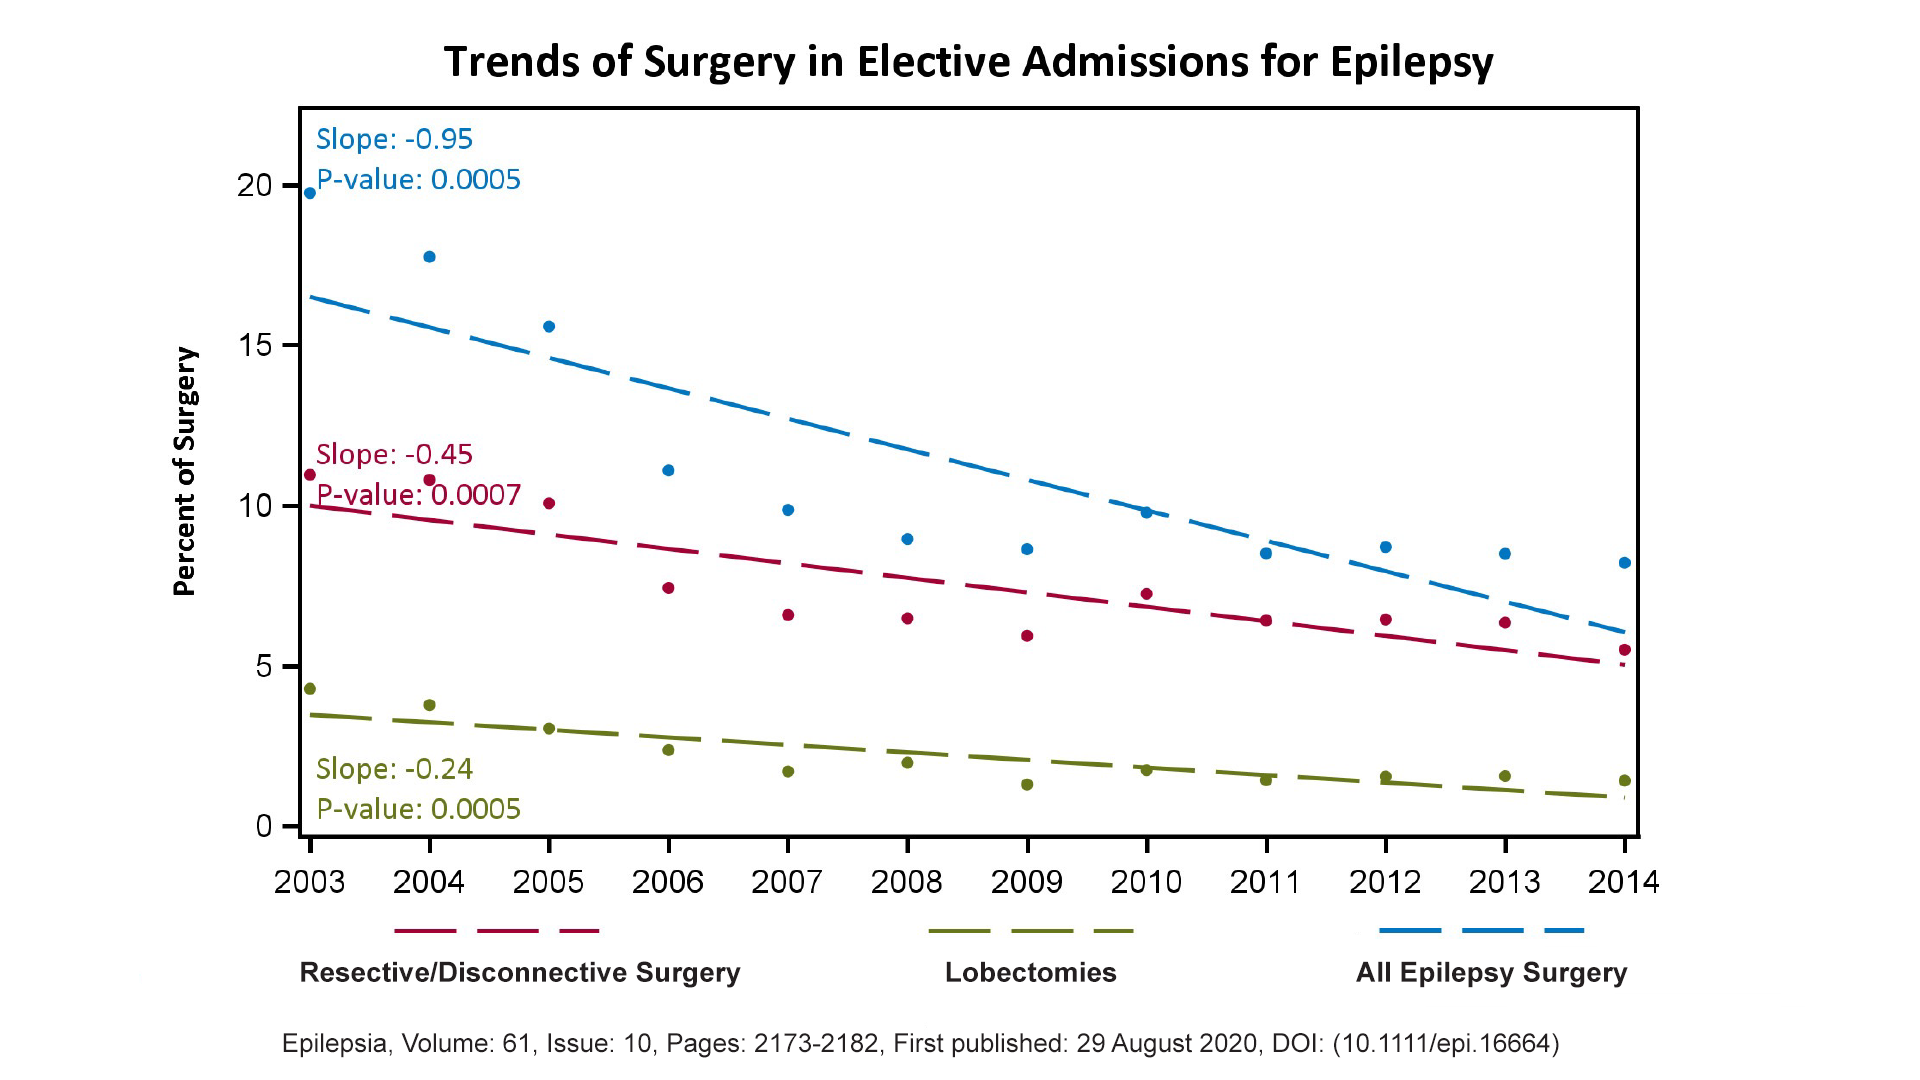 Trends of surgery in elective admissions for epilepsy as a percentage of all primary epilepsy discharges comparing lobectomies and amygdalohippocampectomies, versus resective and disconnective surgeries versus all epilepsy surgery types. 





 





